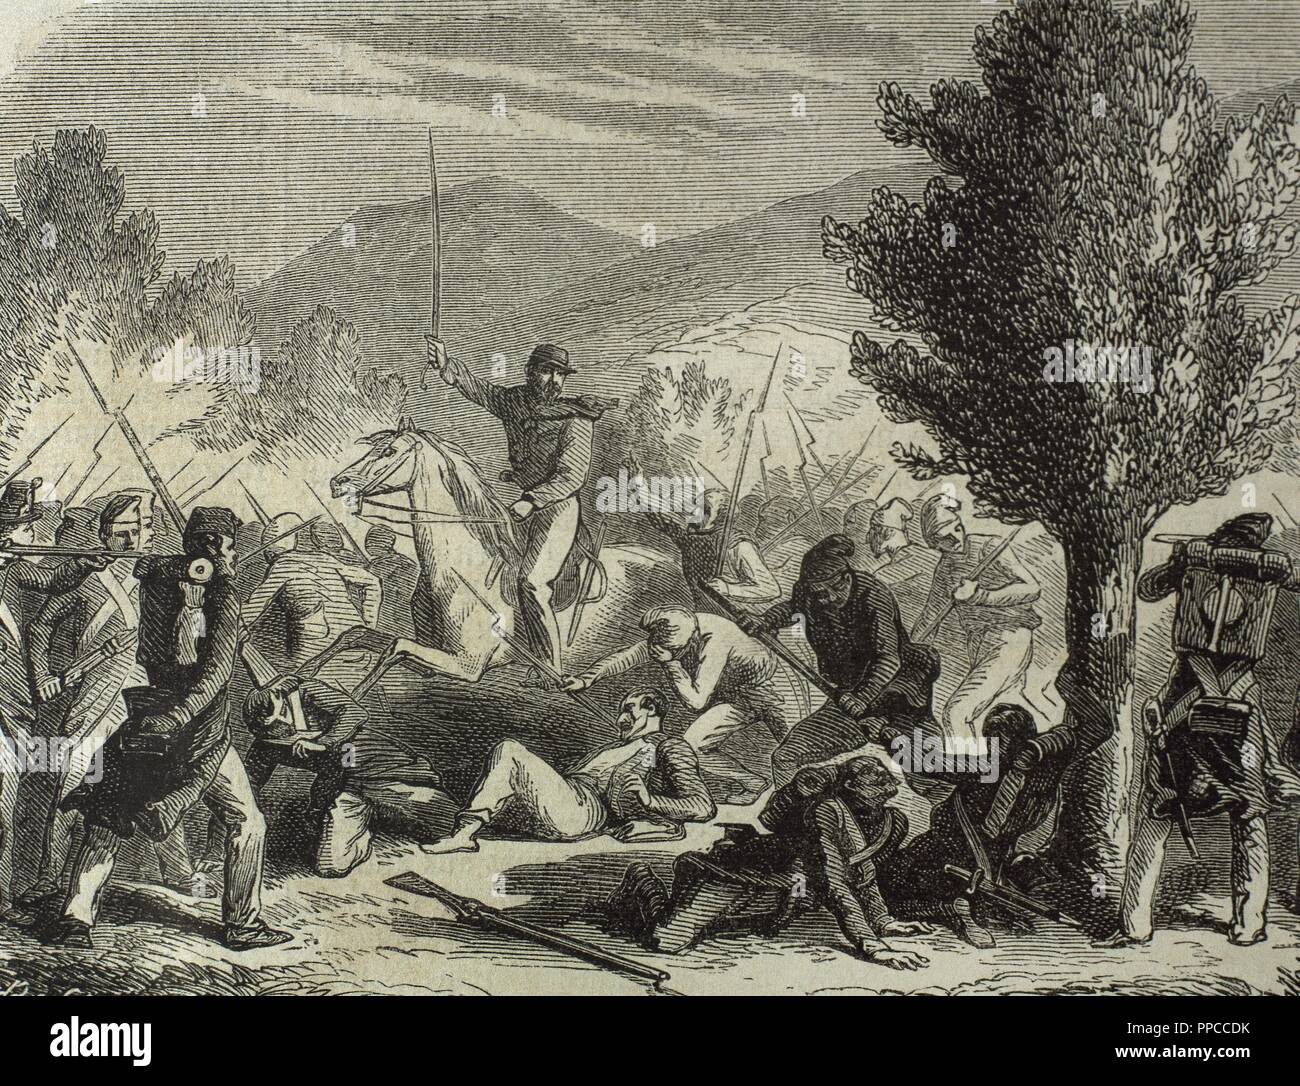 Italian unification (1859-1924). The Expedition of the Thousand. The Battle of Volturnus or Volturno (1860) between Giuseppe Garibaldi's volunteers (Red shirts) and Hungarian veterans and the troops of the Kingdom of the Two Sicilies, ruled by the Bourbons.'L'Illustration' (1860). Engraving. Stock Photo